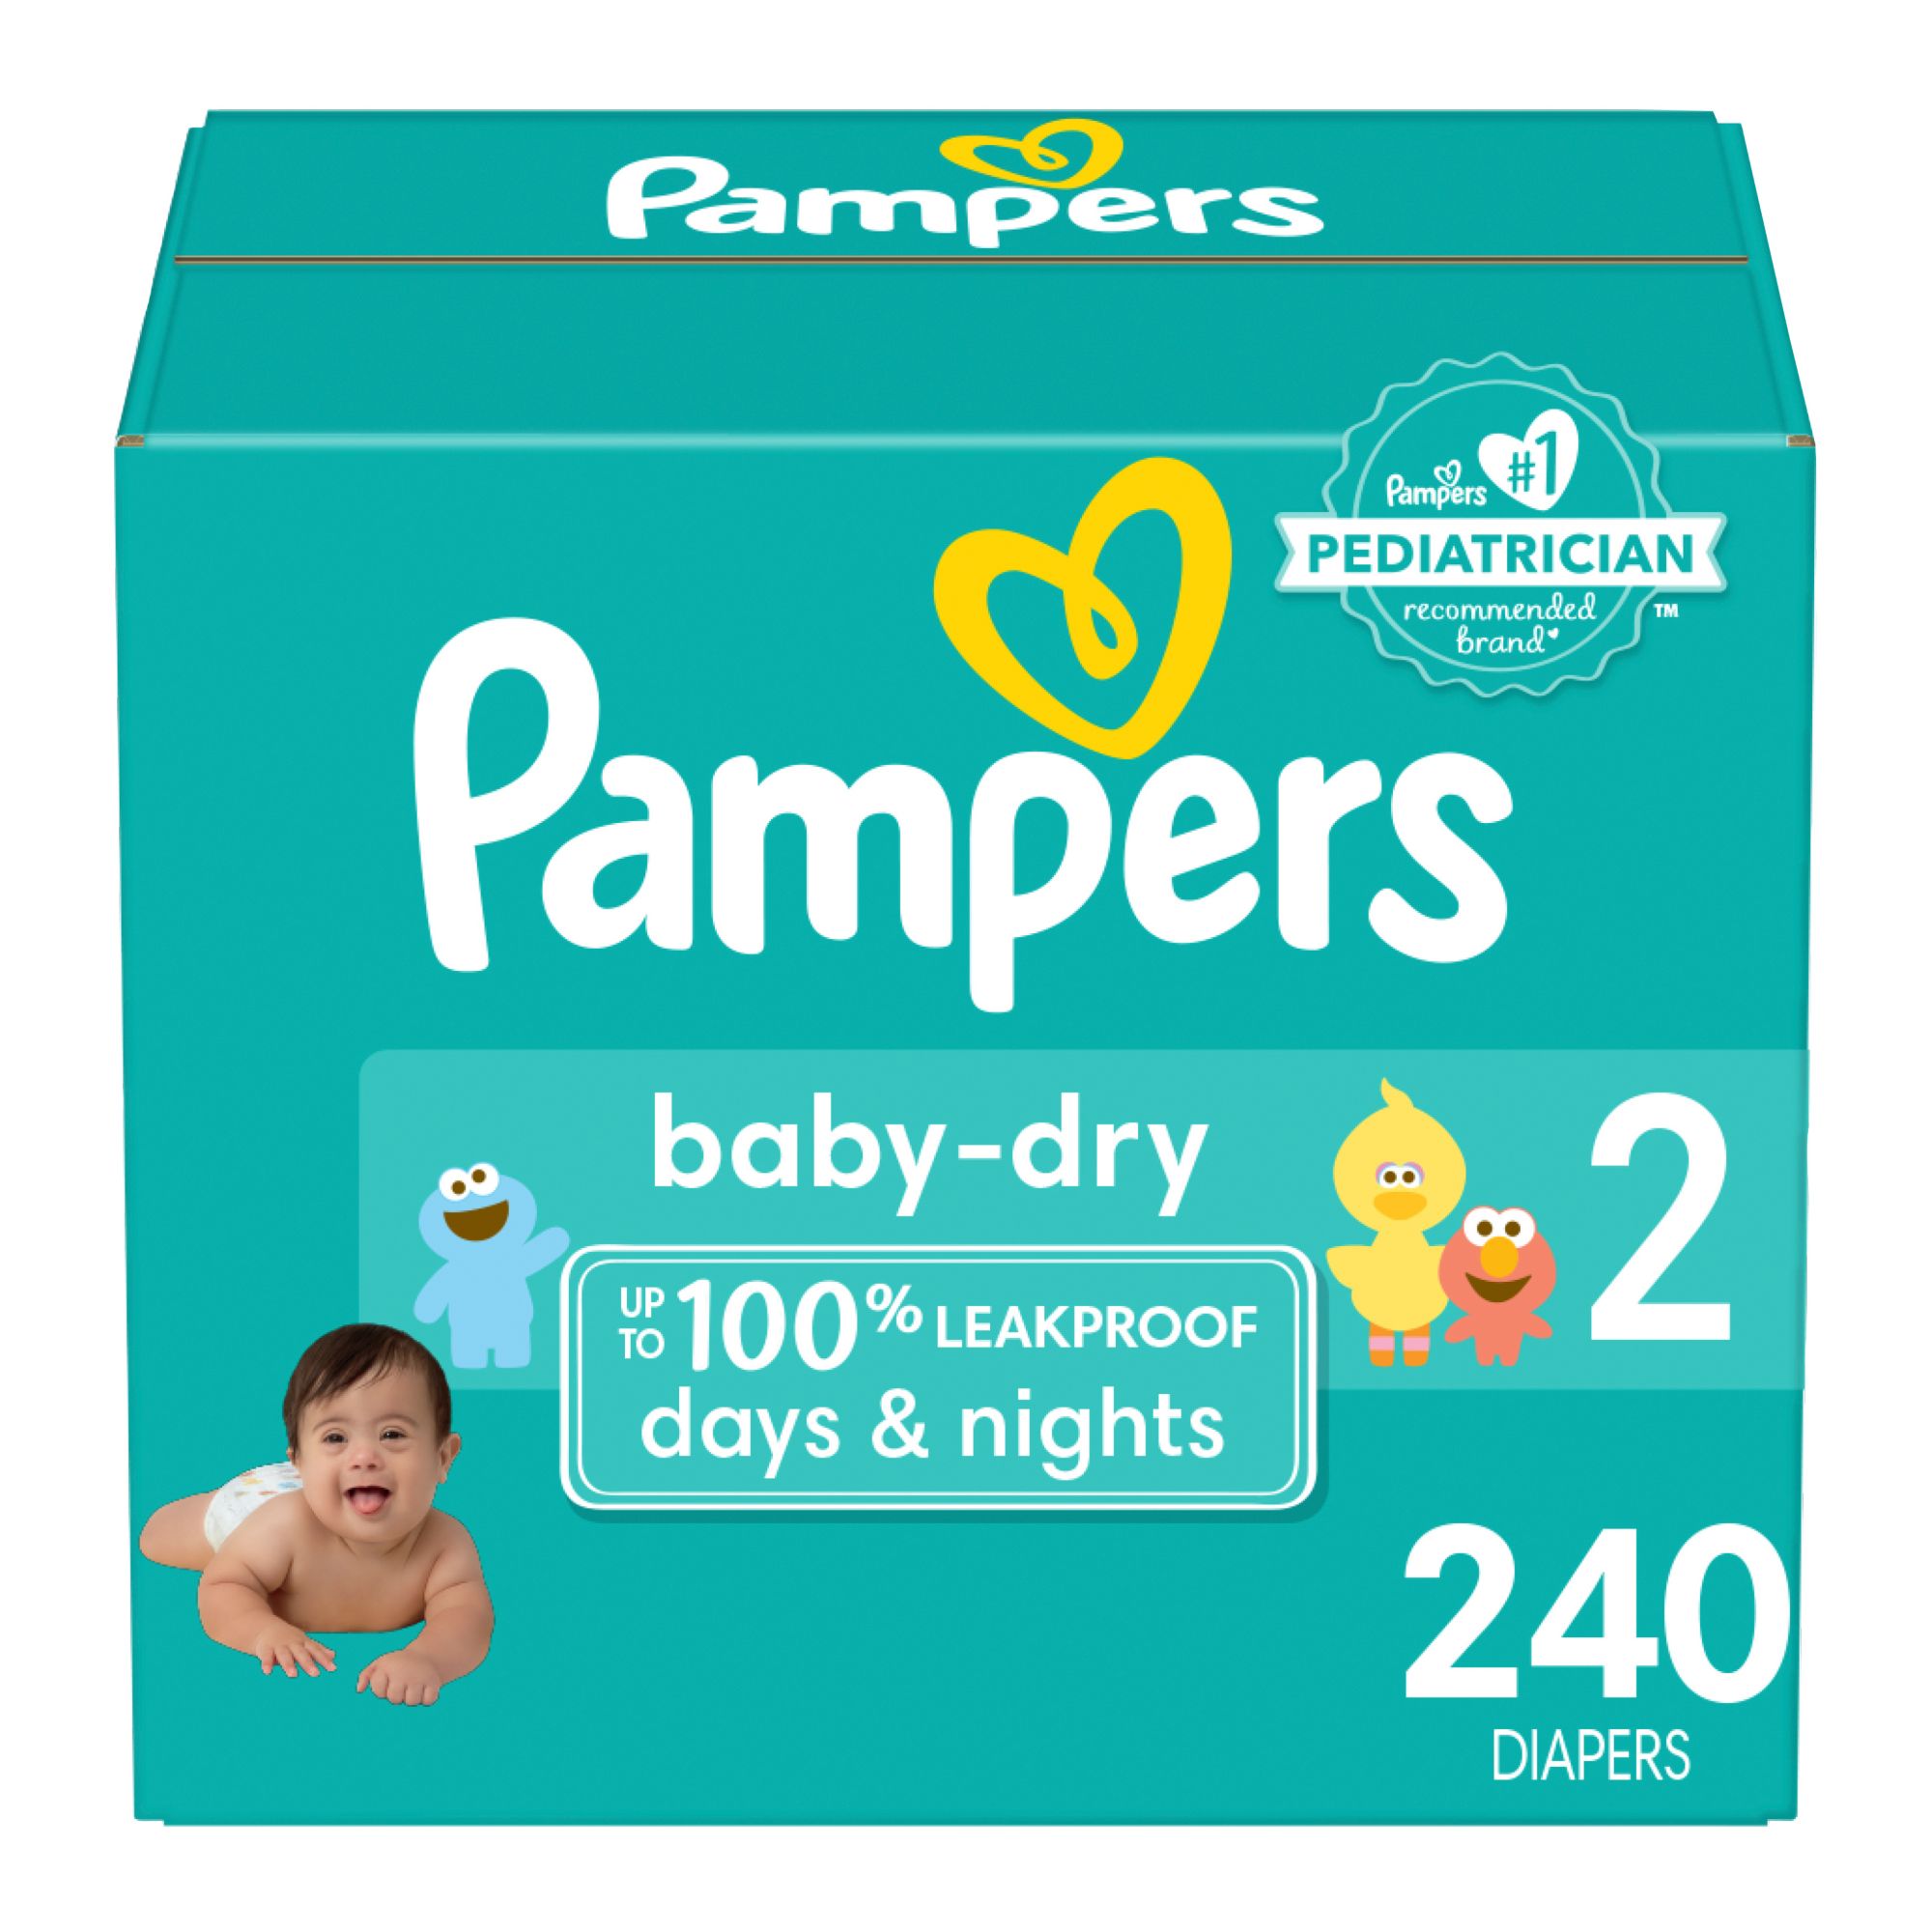 Lot 2 Giga Pack Pampers Baby-Dry Pants T6 Taille 6 14-19kg - Pampers